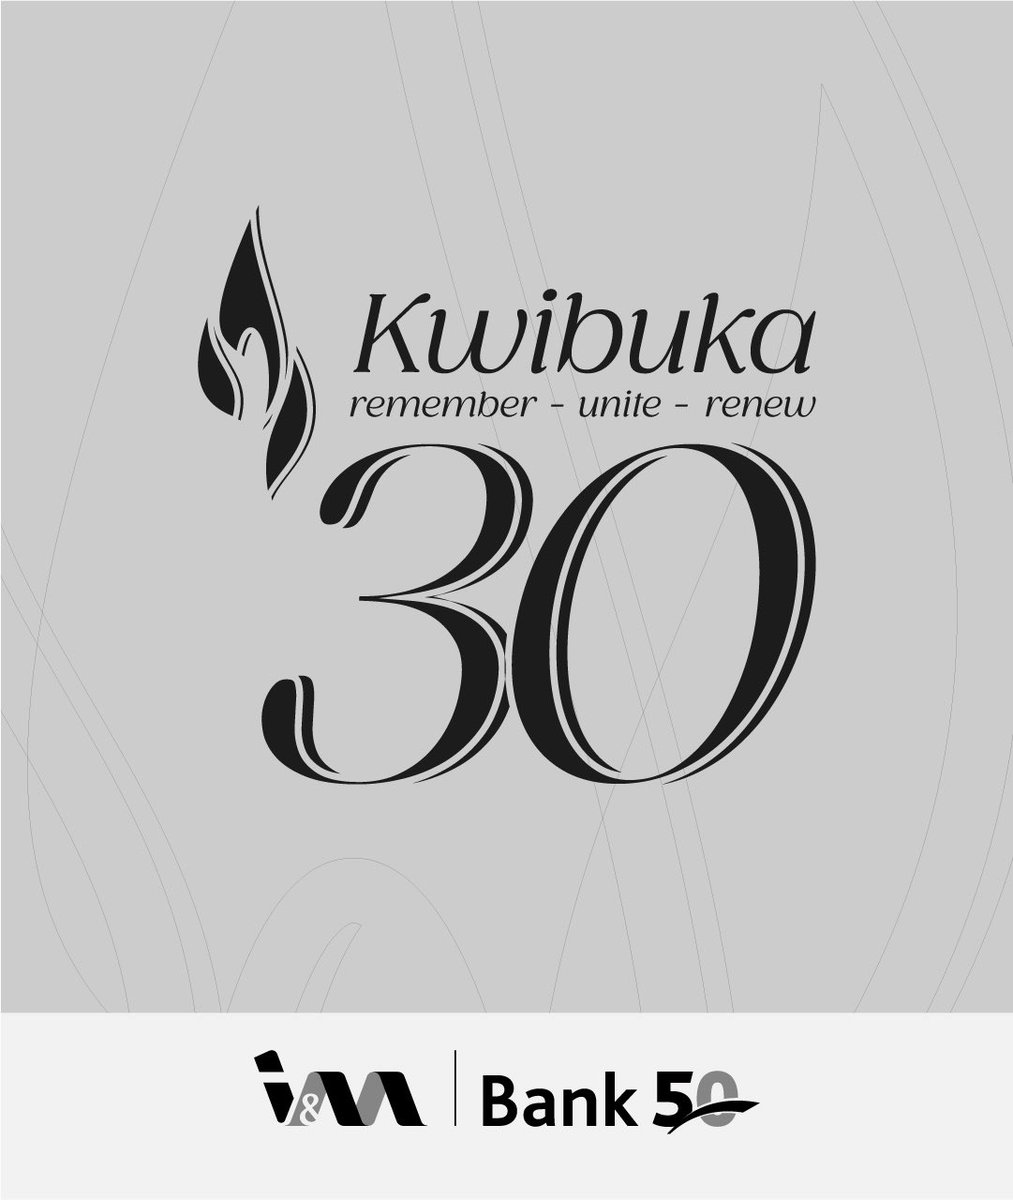 We stand with Rwanda as we commemorate the 1994 Genocide against the Tutsi and honor the memory of those who lost their lives. Today, 30 years later, we remember, unite, and renew to ensure this tragedy never happens again. #Kwibuka30